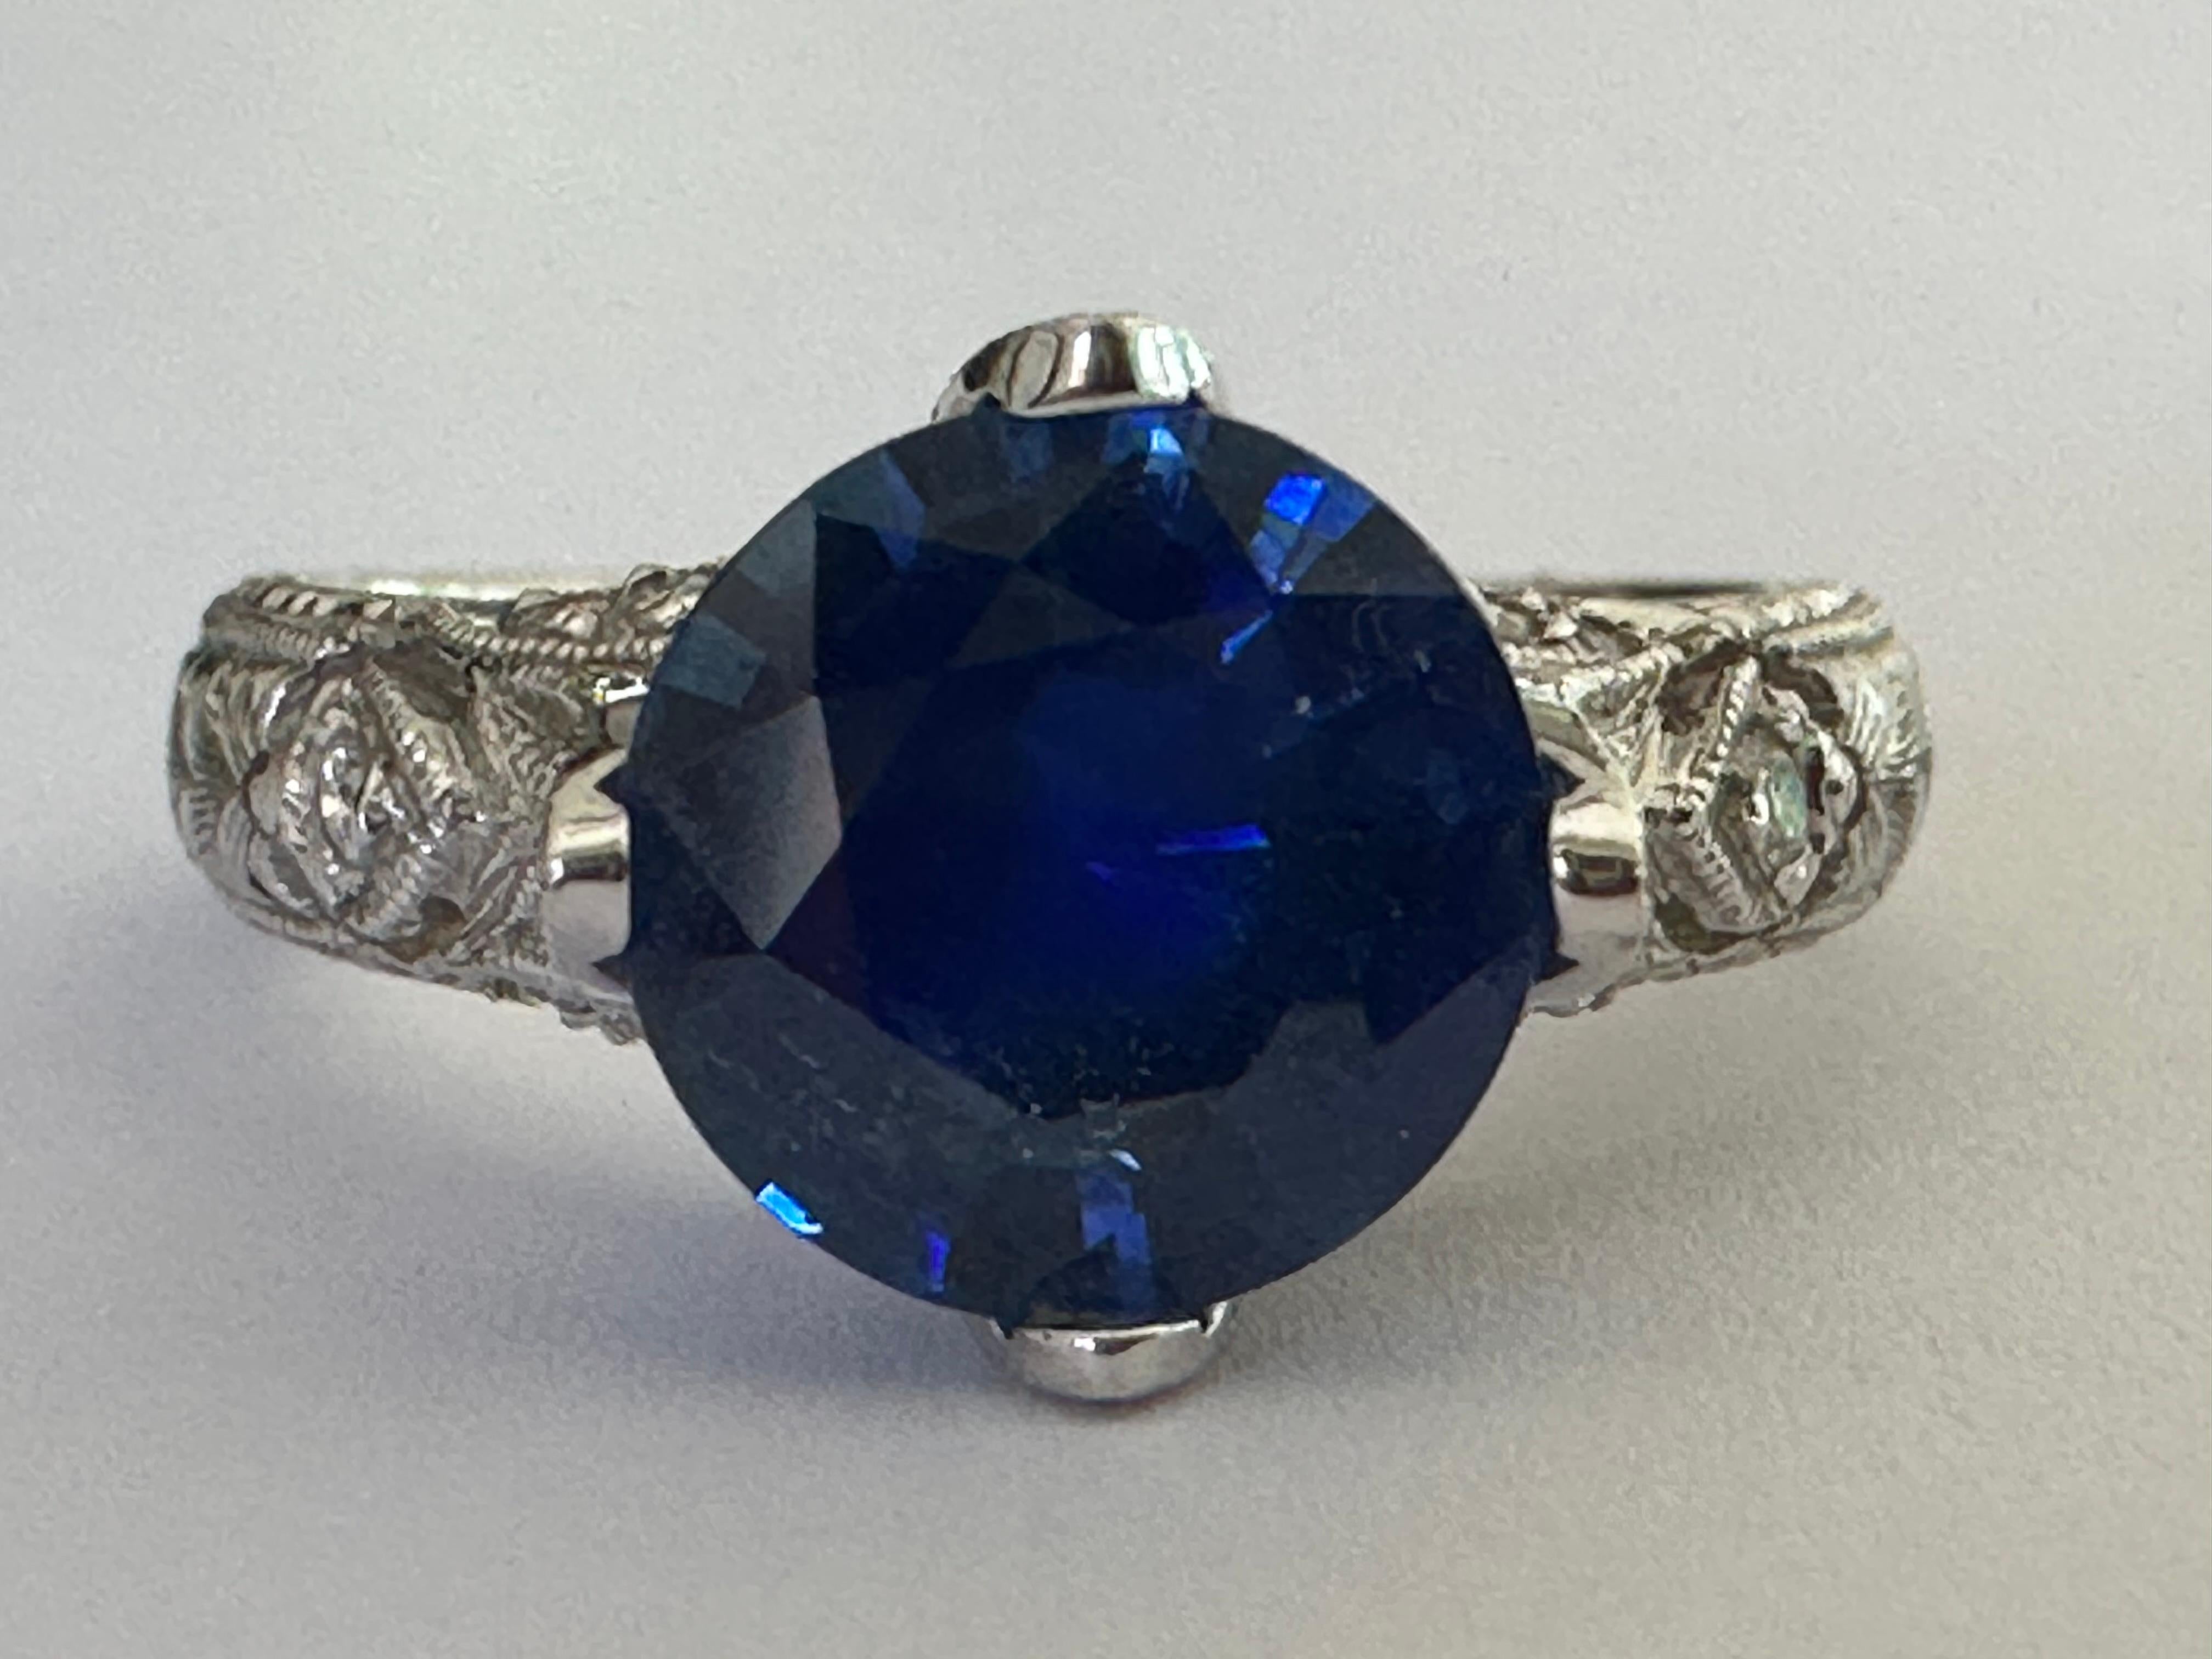 This ring features a 2.45-carat natural deep blue round-shaped sapphire adorned with 18 round diamonds totaling approximately 0.23 carats. Stamped VIACHI and set in 18K white gold with delicate hand engraving along the band. 
